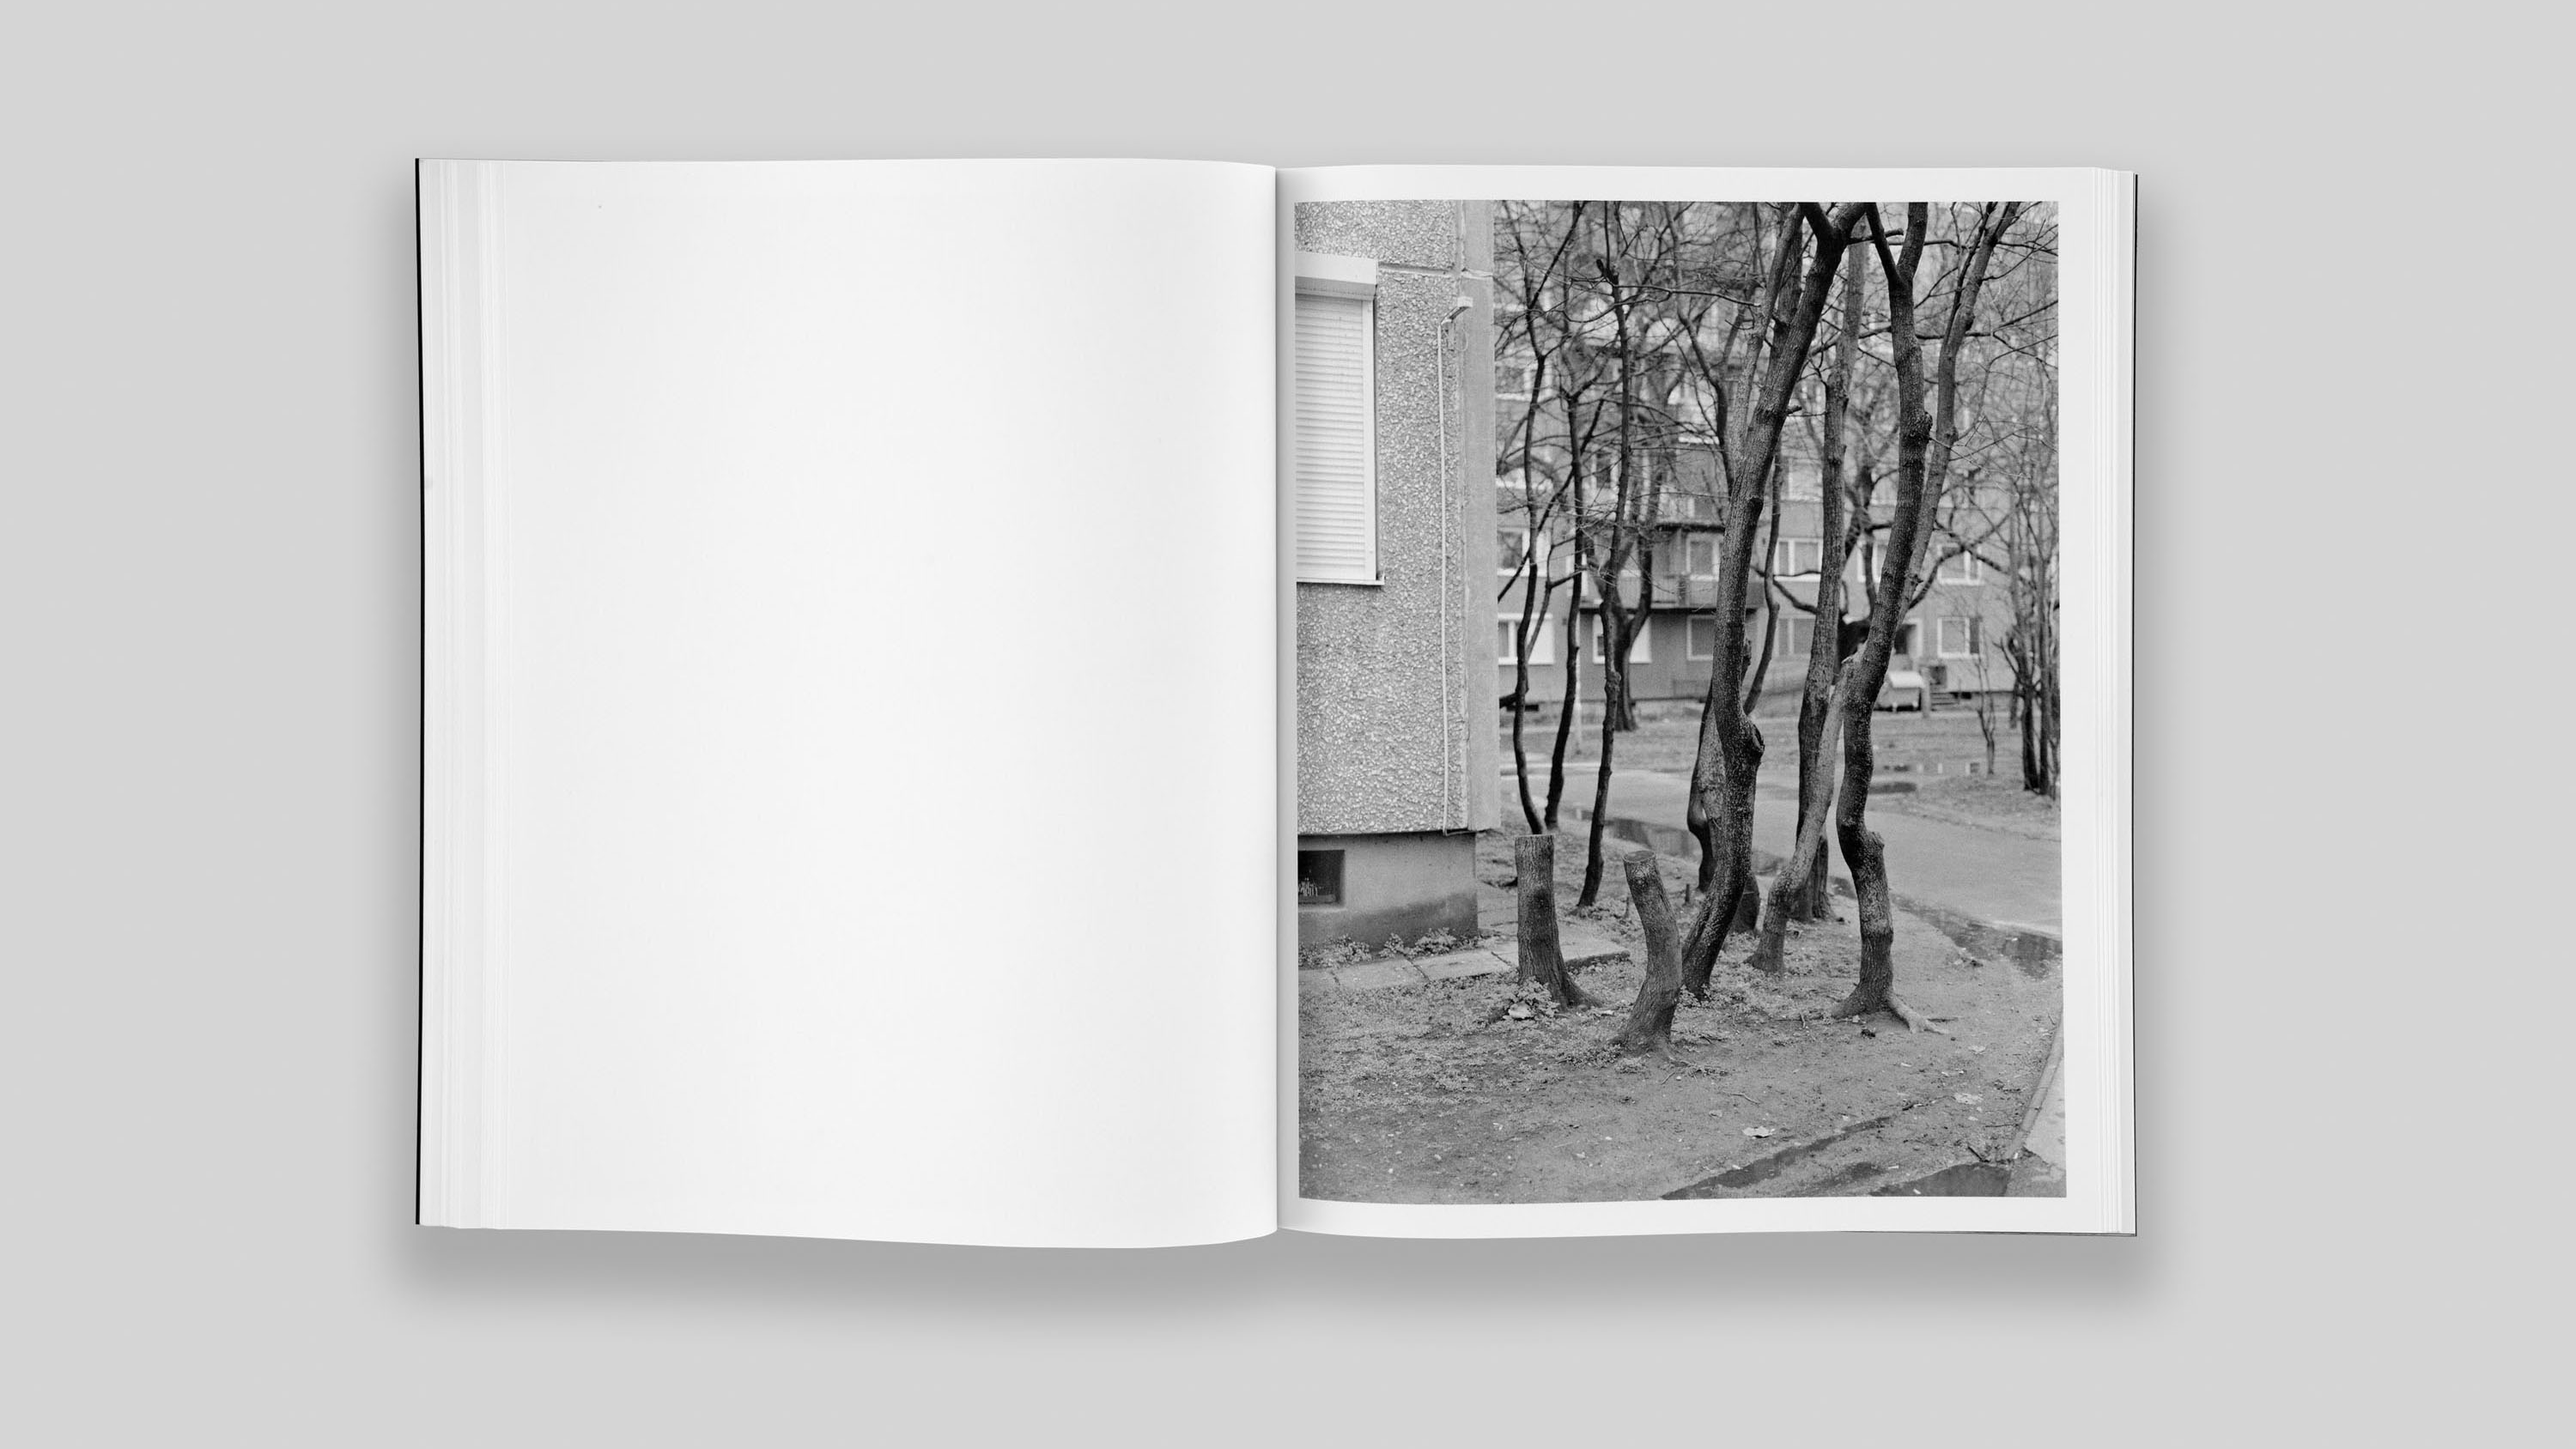 image copyright bertrand cavalier, concrete doesn't burn, 2020, book published by fw:books